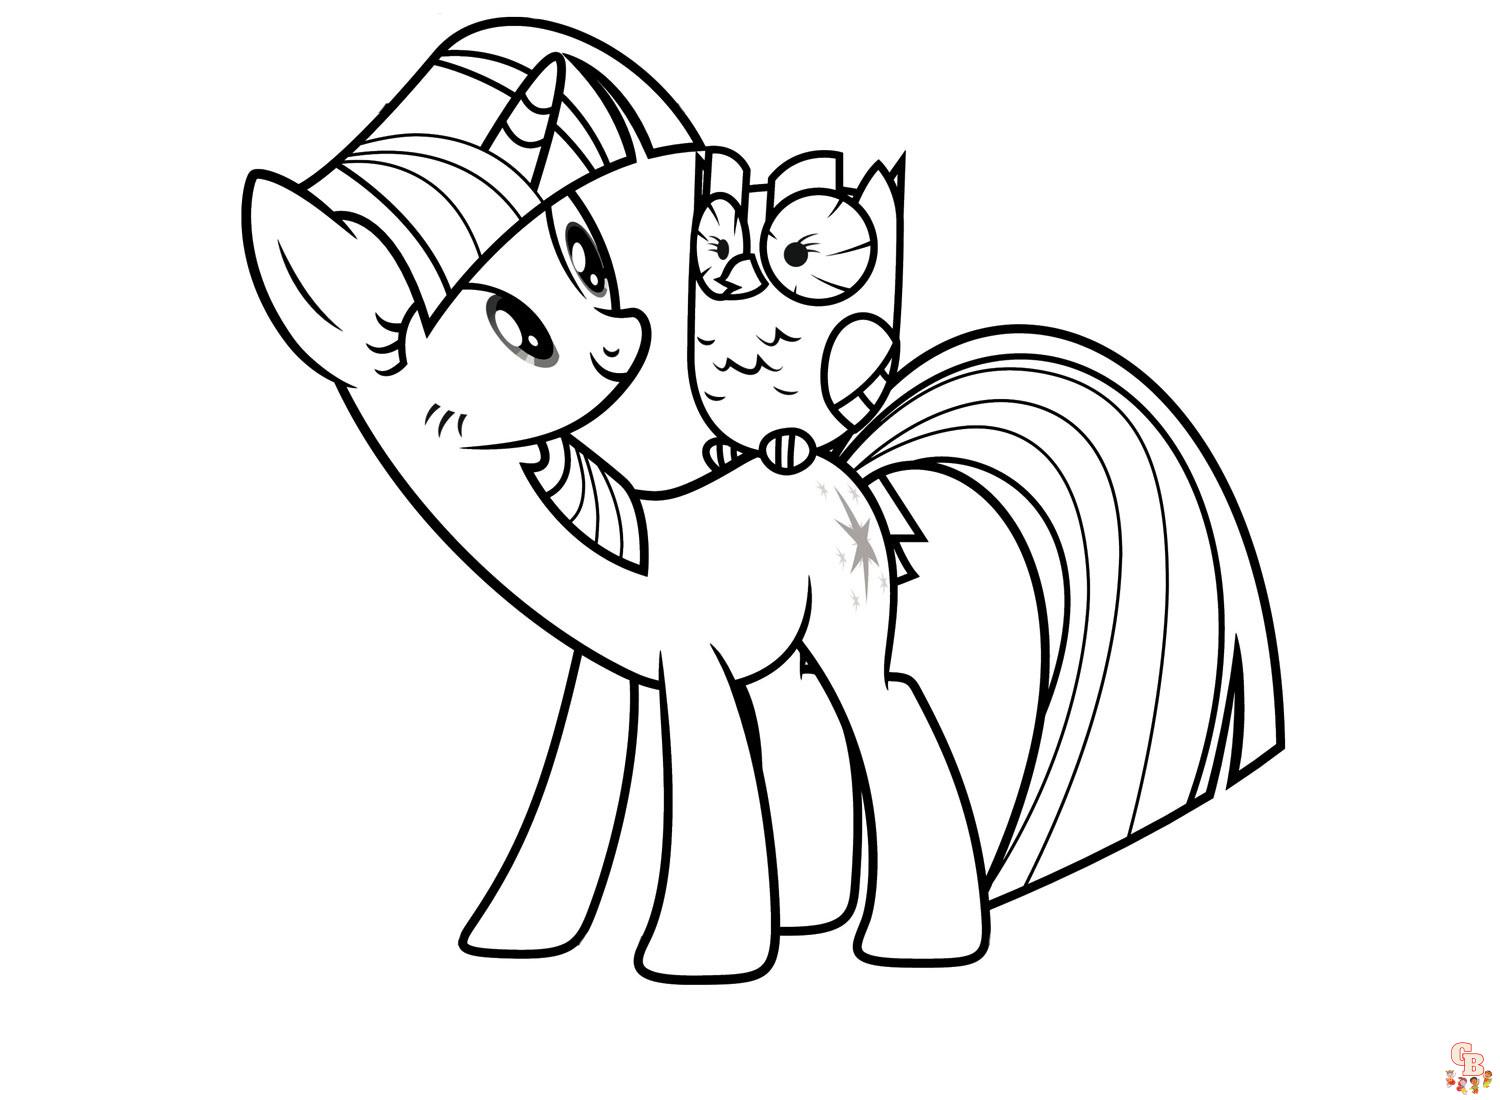 Cute Twilight Sparkle coloring pages printable